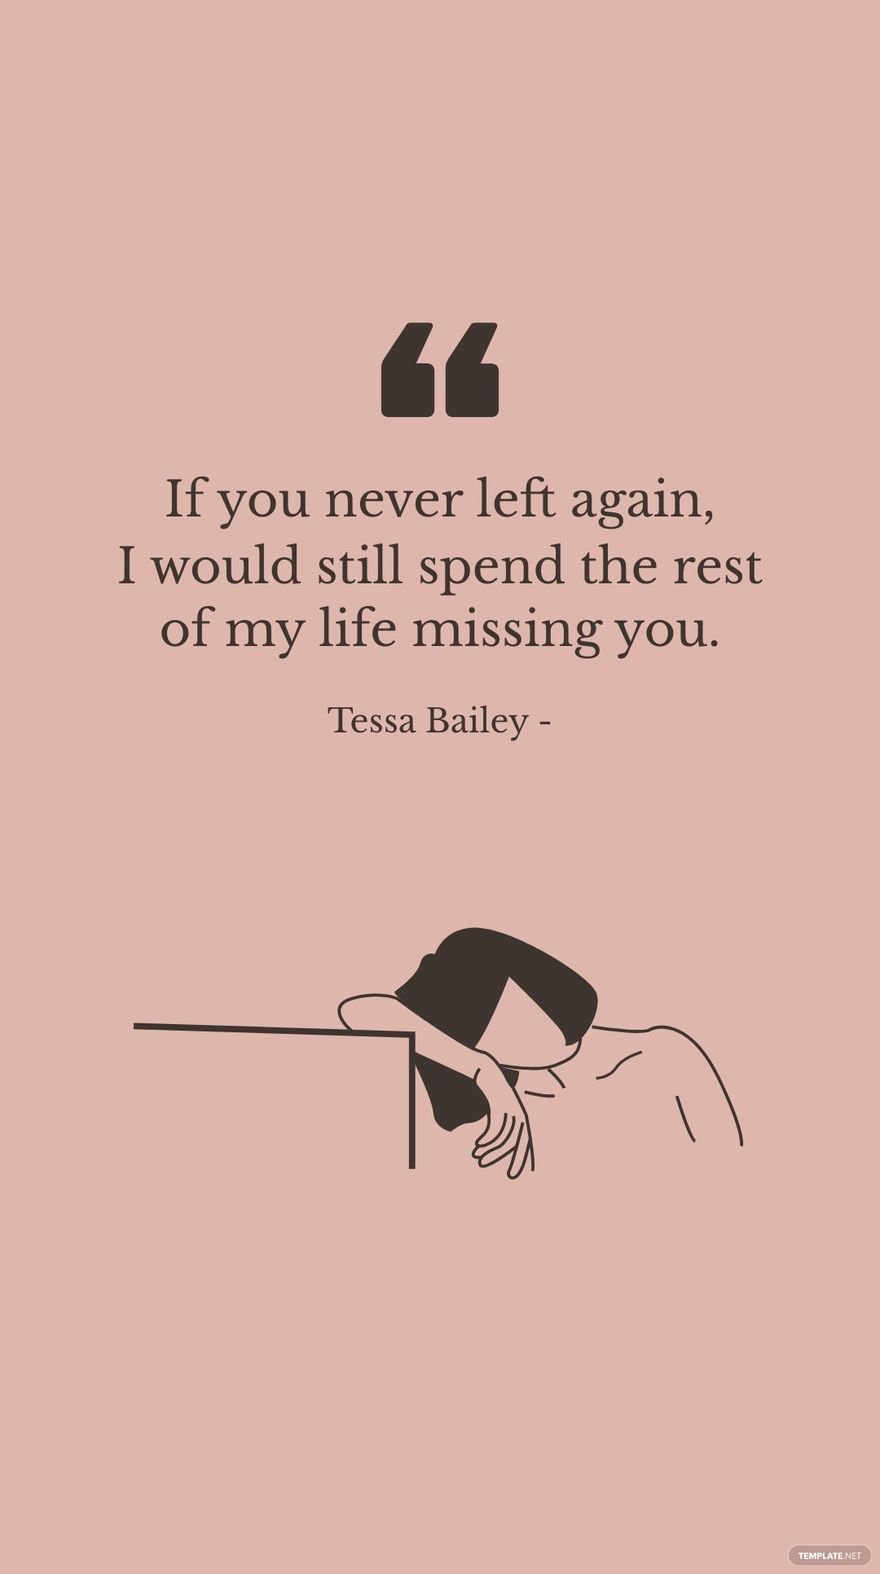 Tessa Bailey - If you never left again, I would still spend the rest of my life missing you. in JPG